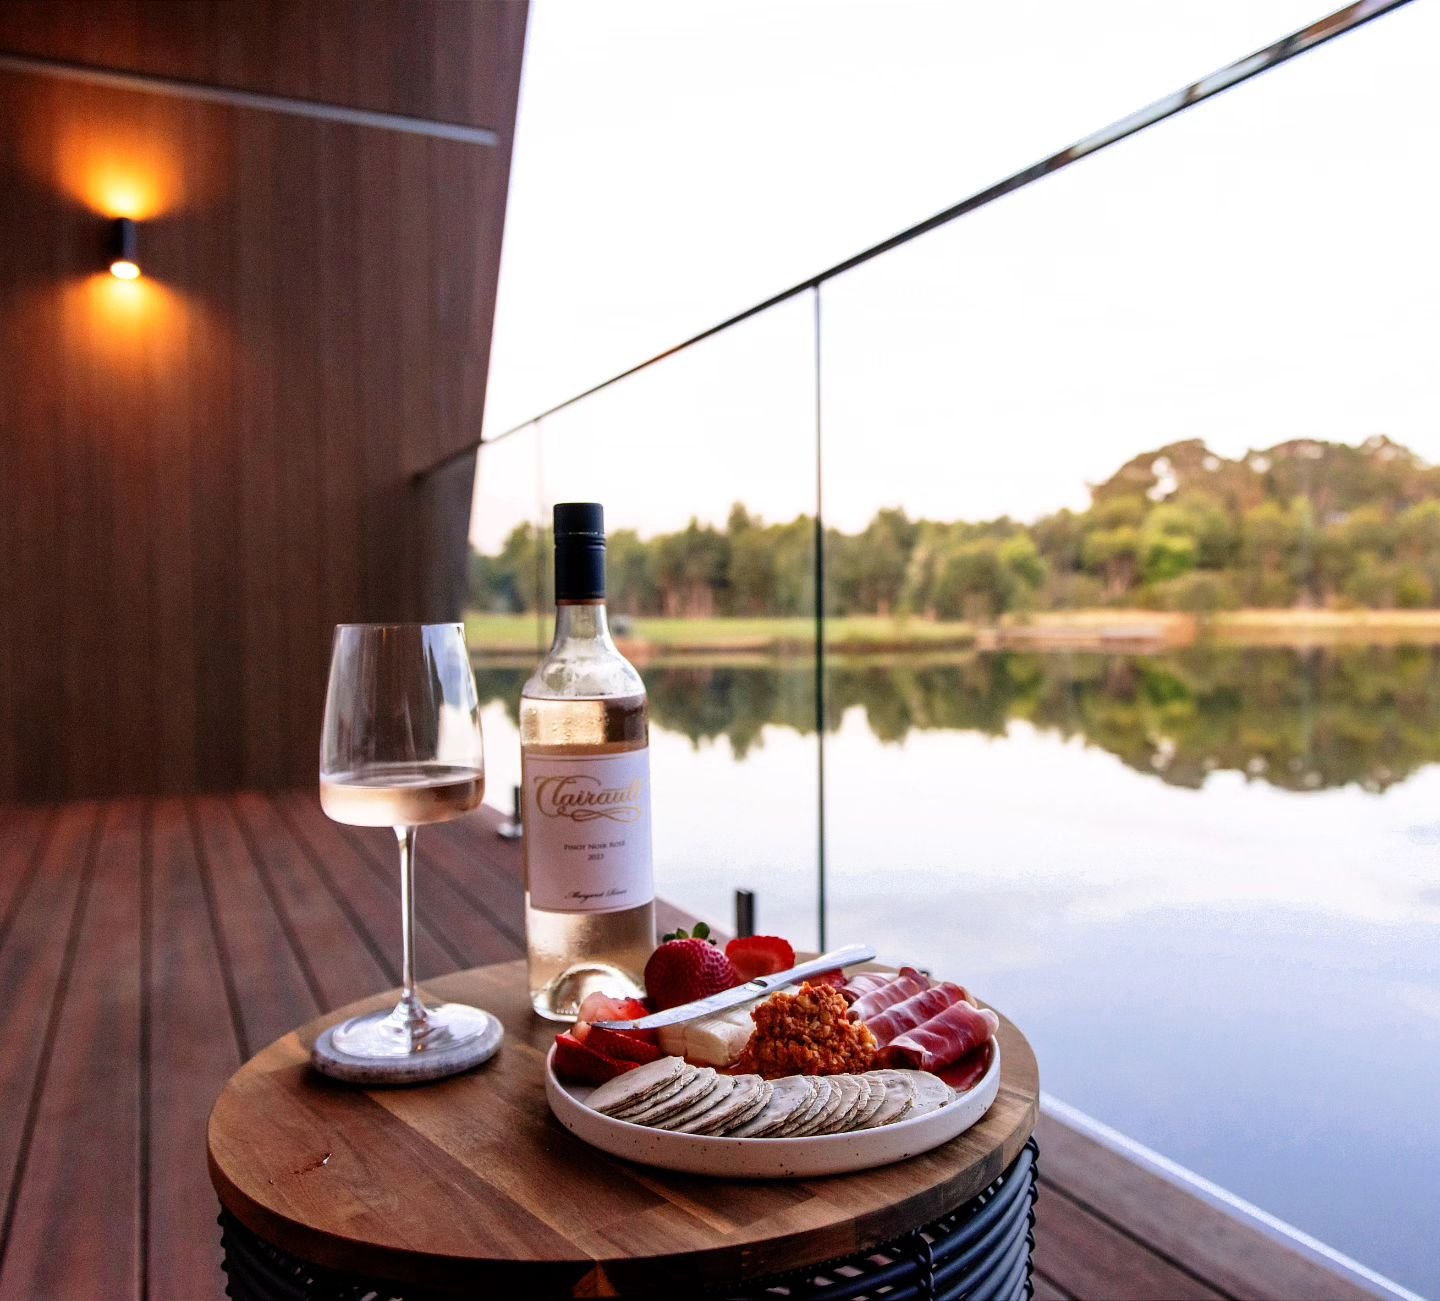 Dinner and wine on your accommodation balcony ✨ Who needs this?
#takemehere #edgeluxuryvillas #margaretriverregion

After an exciting day exploring the Margaret River Wine Region, it's time to head back to your luxury villa to relax with the most mag